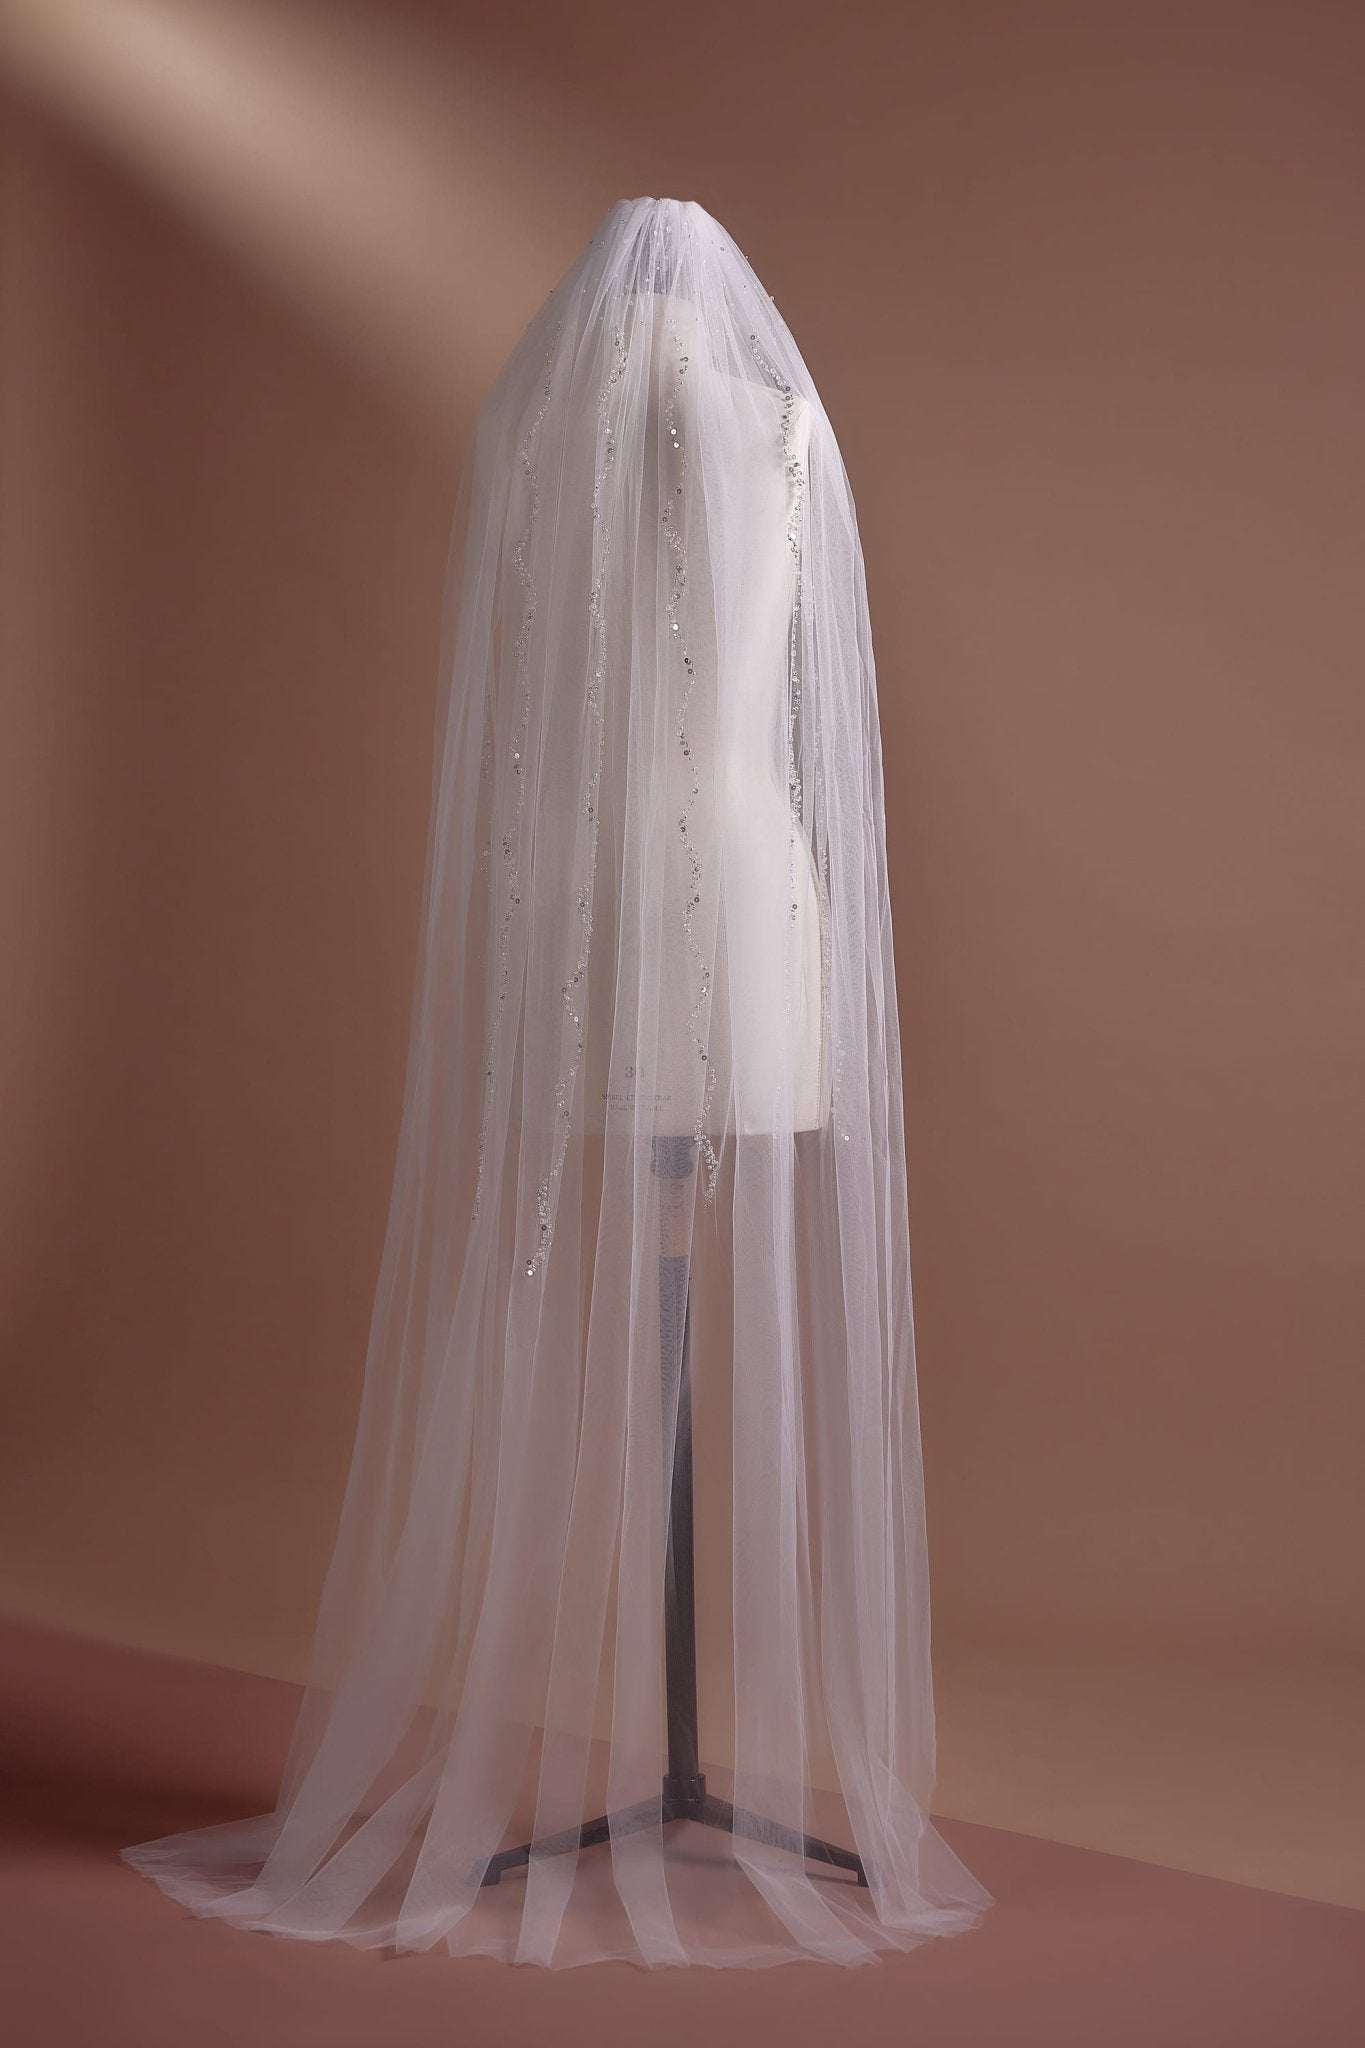 Sequined Embellished Long Tulle Wedding Veil, Available with or without Comb - WonderlandByLilian